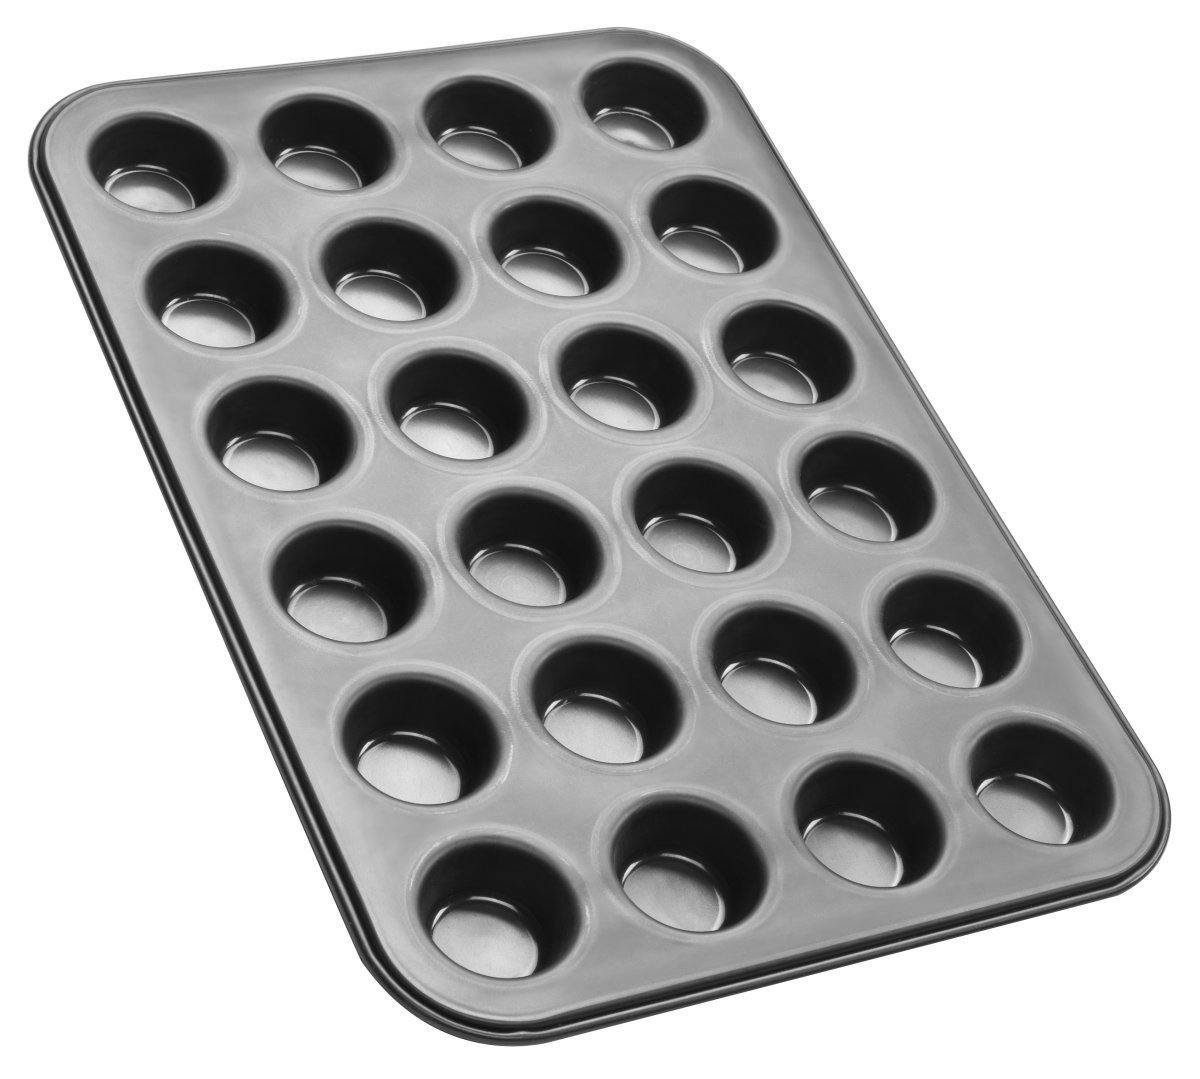 Zenker  "Black/Metallic" Mini-Muffin Tin For 24 Muffins, 38.5X26.5X2 cm - Whole and All